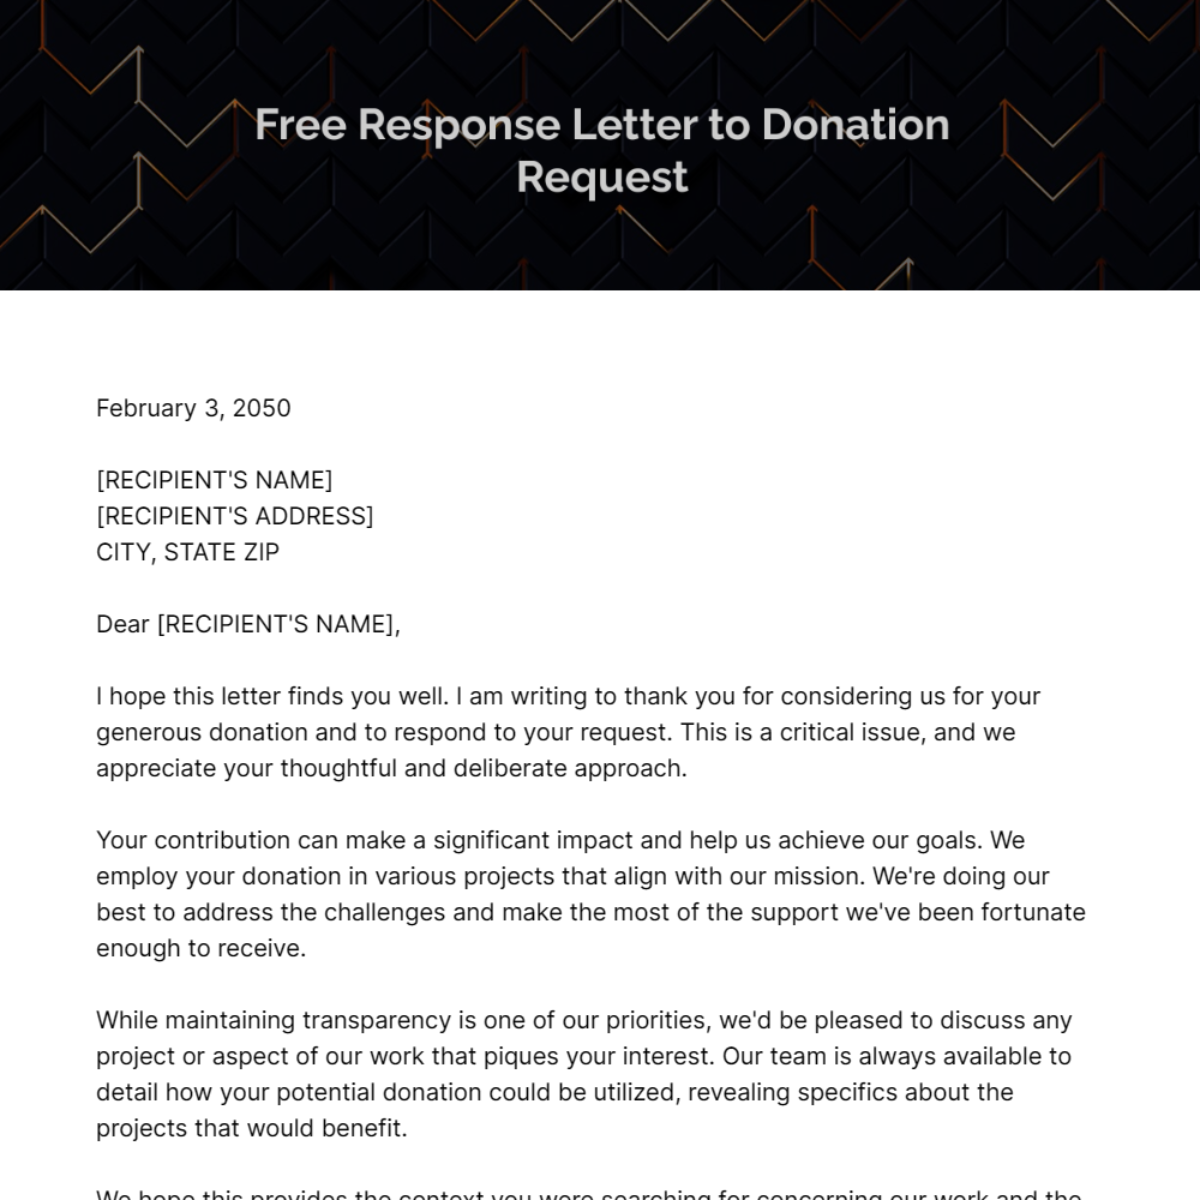 Free Response Letter to Donation Request